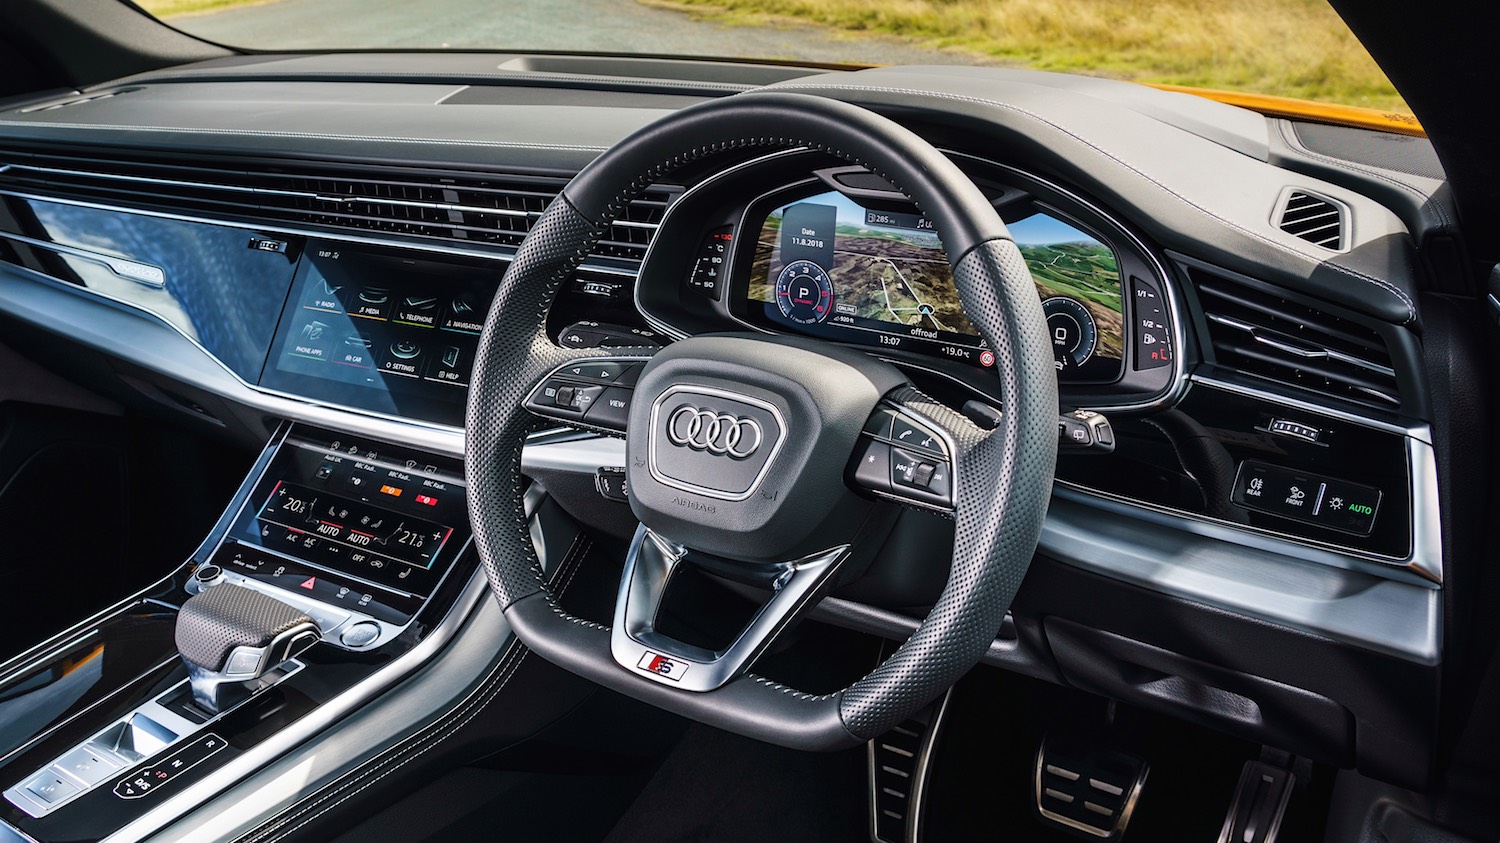 Maggie Barry reviews the All-New Audi Q8 Vorsprung edition for drive 25.